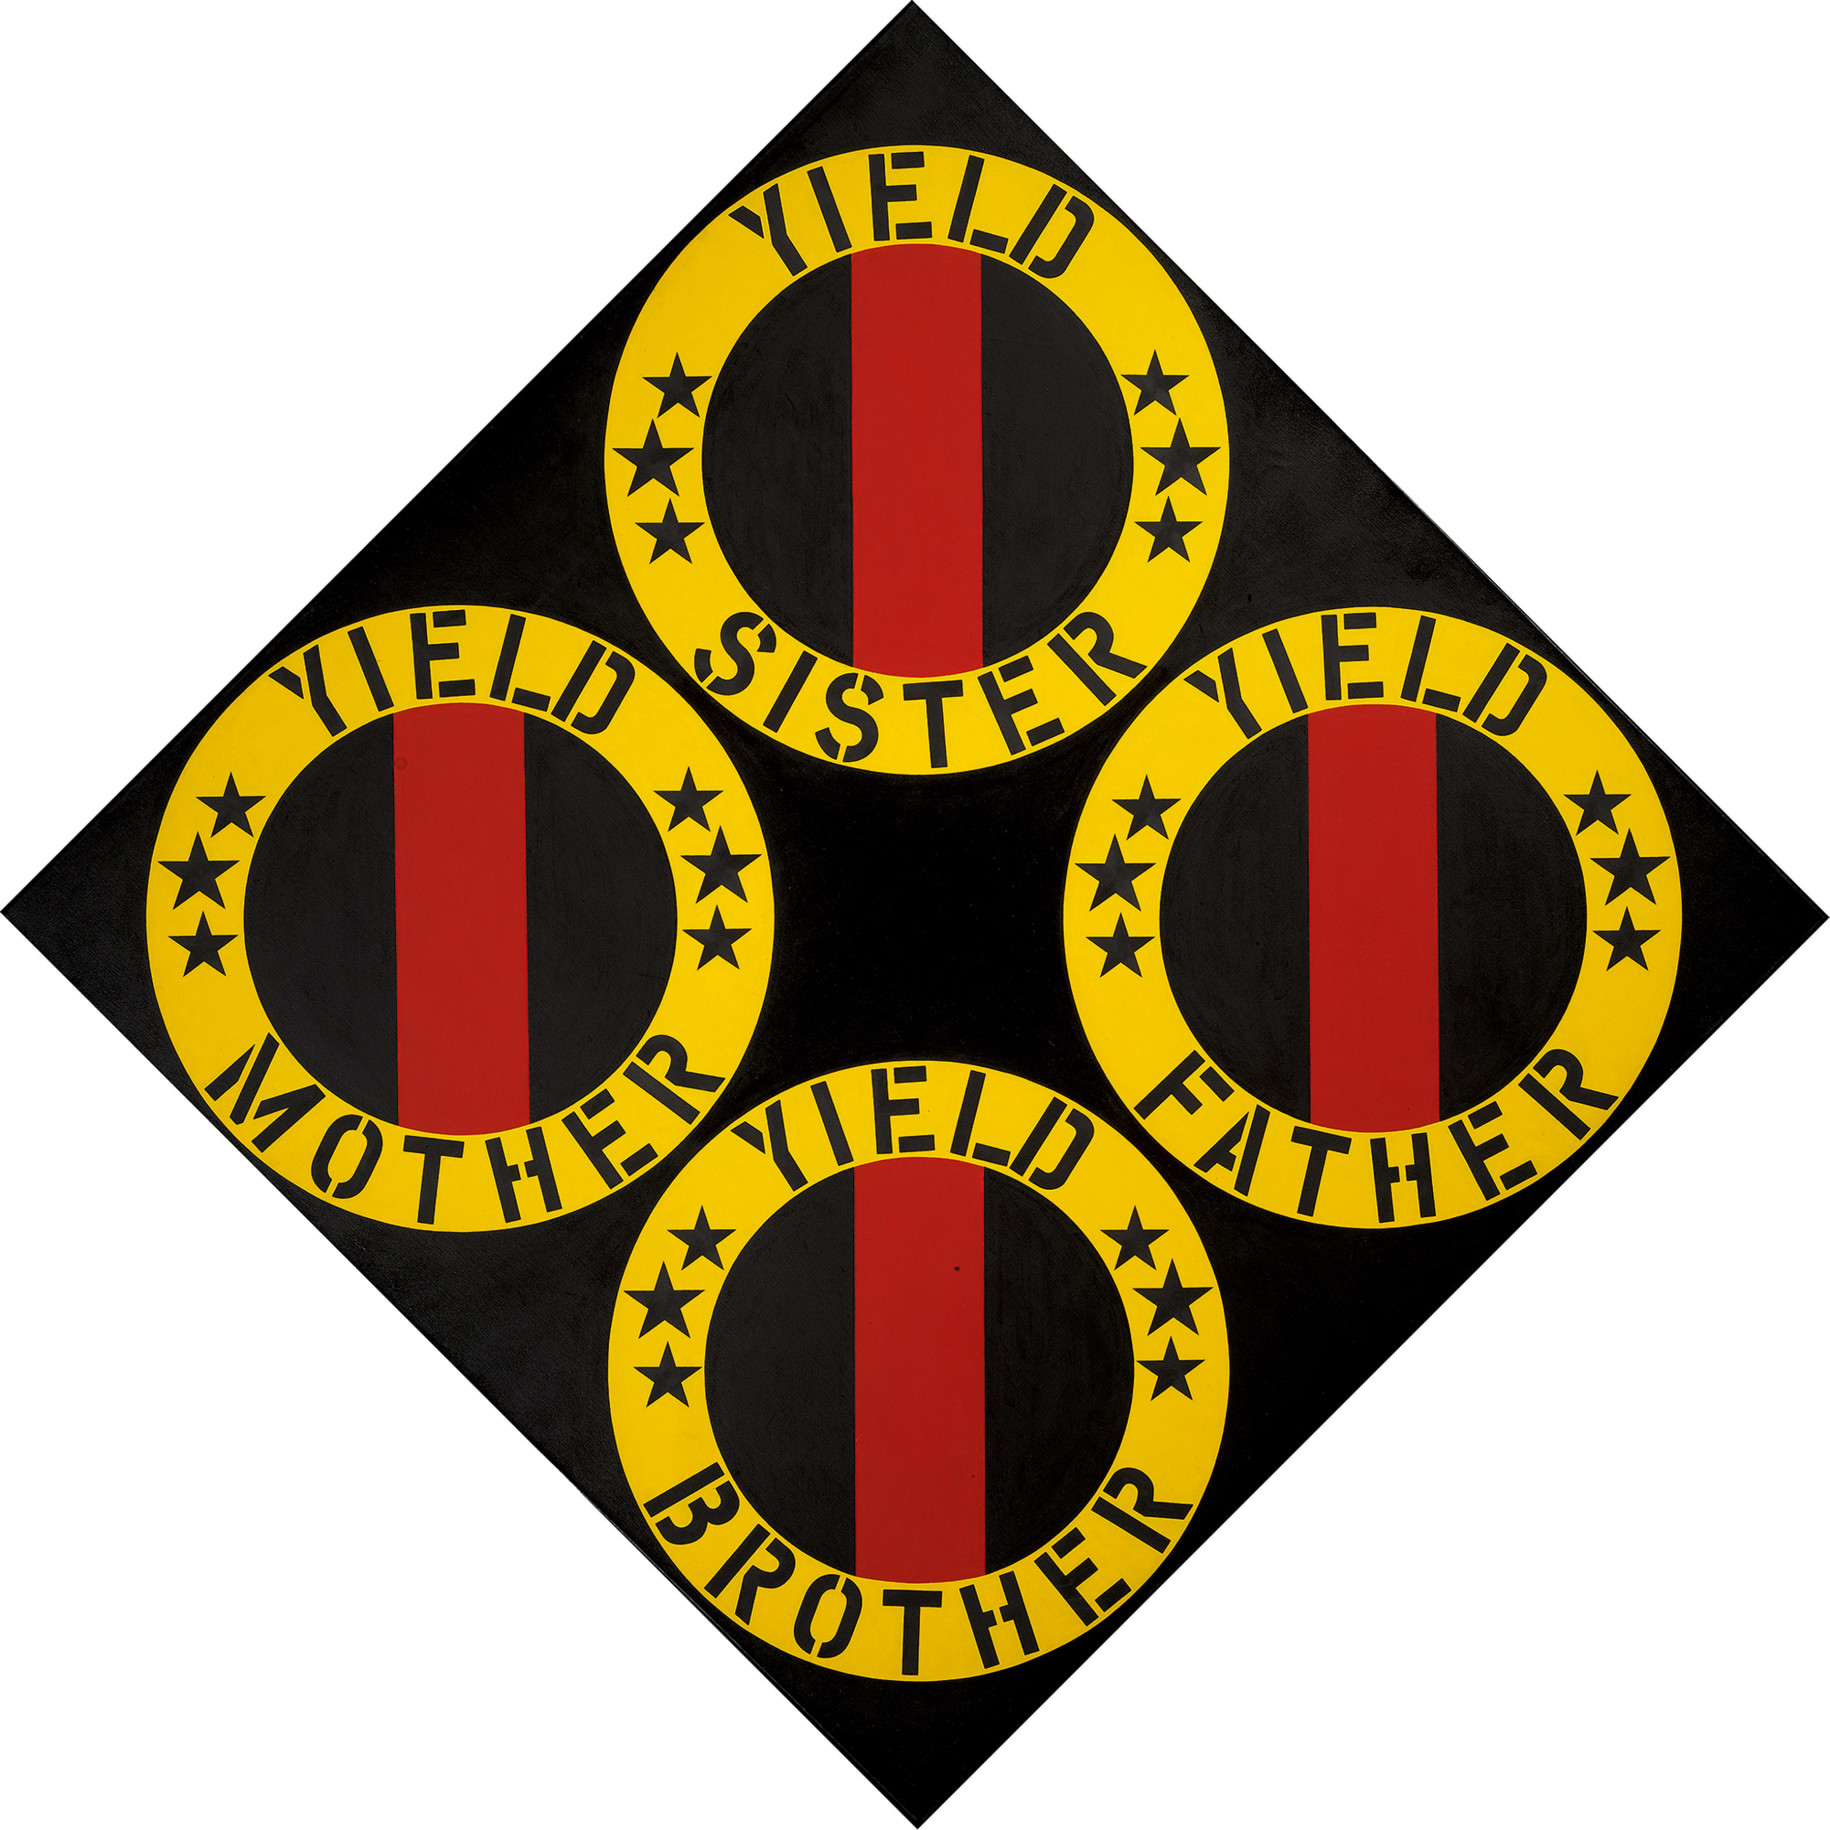 The Black Yield Brother III, an 85 by 85 inch black diamond shaped canvas containing four black circles with a red vertical band surrounded by a yellow ring containing black text and six small black stars. The text in each ring reads, starting a top and going clockwise, &quot;Yield Sister,&quot; &quot;Yield Father,&quot; &quot;Yield Brother,&quot; and &quot;Yield Mother.&quot;